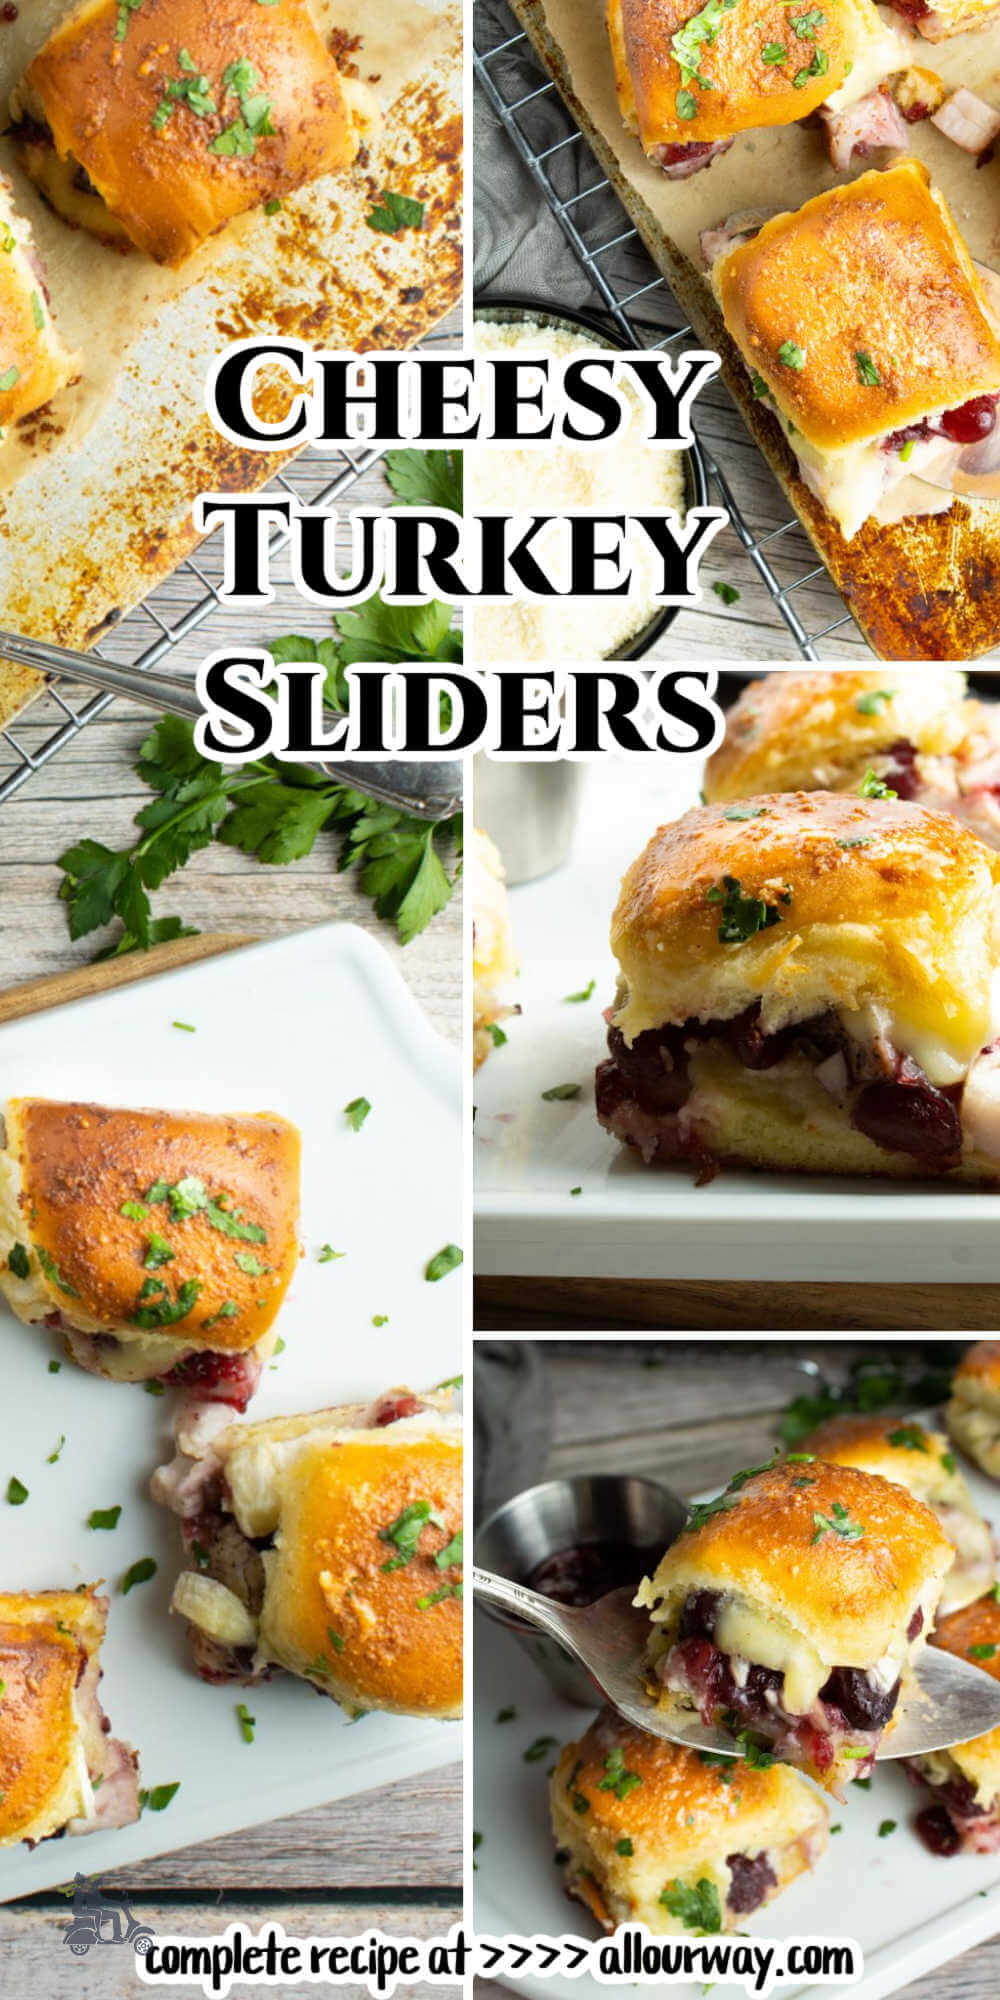 Turkey sliders are delicious party snacks, holiday appetizers, or great option for using up leftover Thanksgiving turkey to feed the family as a light lunch or dinner. Think of these mini sandwiches for game day food or tailgating snacks. The combination of sweet cranberry sauce and salty gooey brie is mouth-watering!